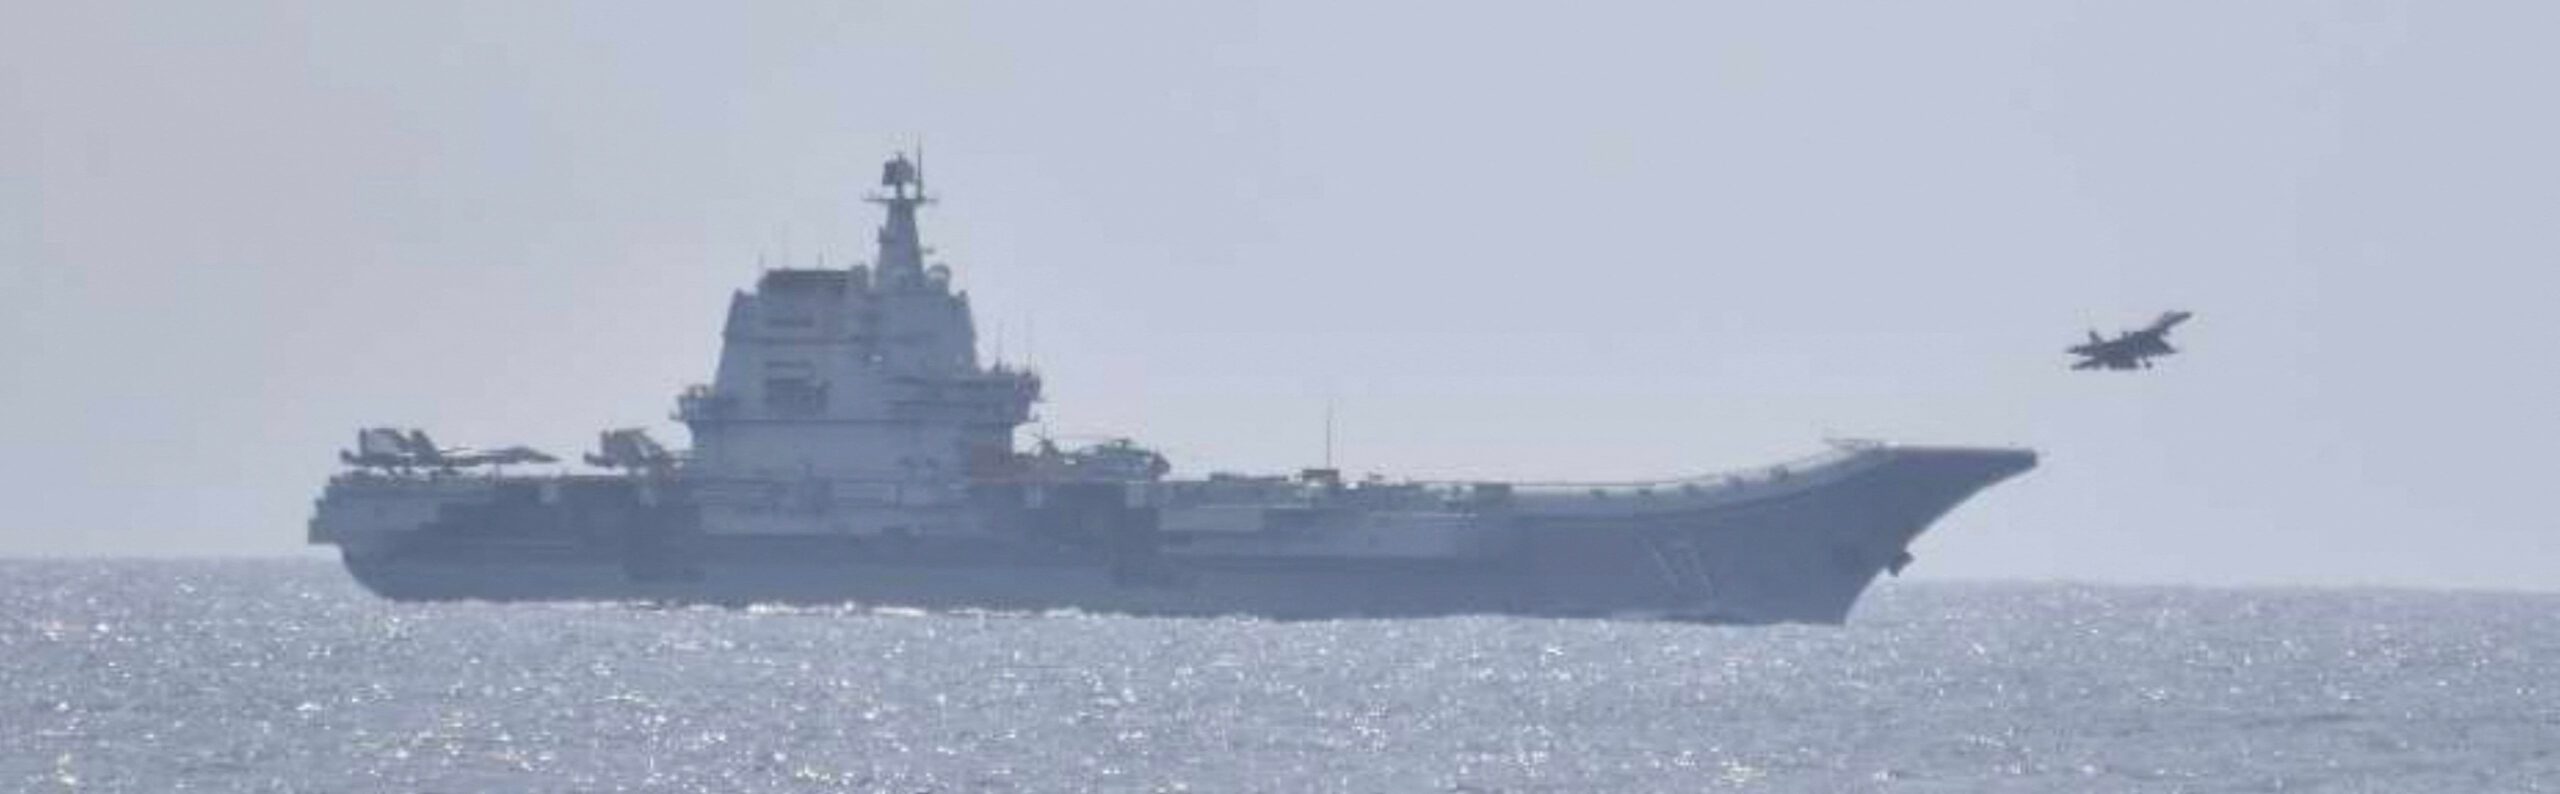 China’s aircraft carrier Shandong returns to home port after show of might